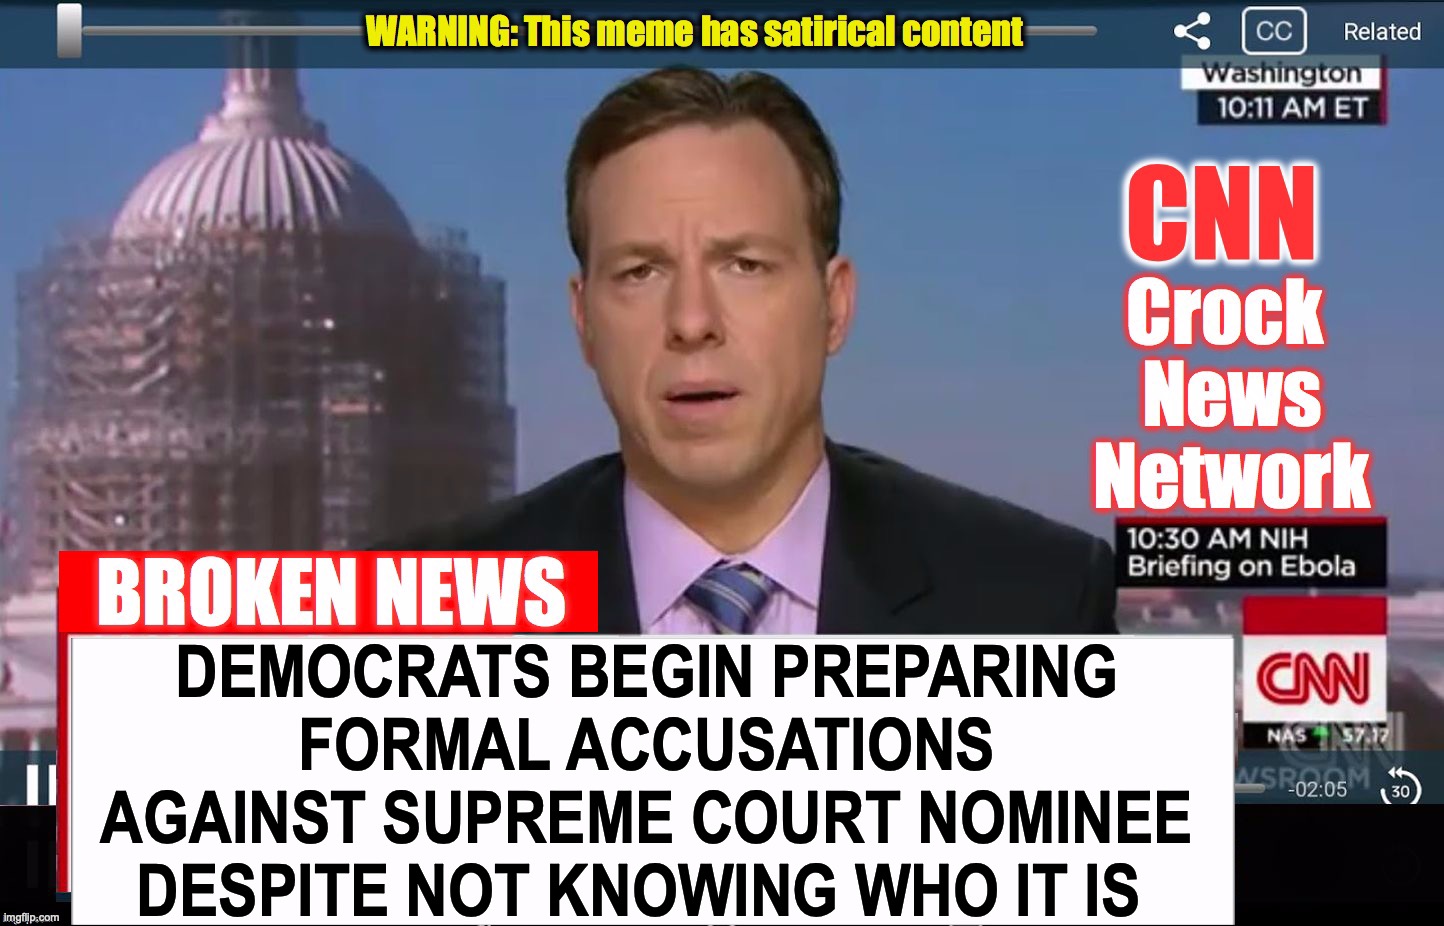 CNN Broken News  | DEMOCRATS BEGIN PREPARING FORMAL ACCUSATIONS AGAINST SUPREME COURT NOMINEE DESPITE NOT KNOWING WHO IT IS | image tagged in cnn broken news,ruth bader ginsburg,supreme court,nomination | made w/ Imgflip meme maker